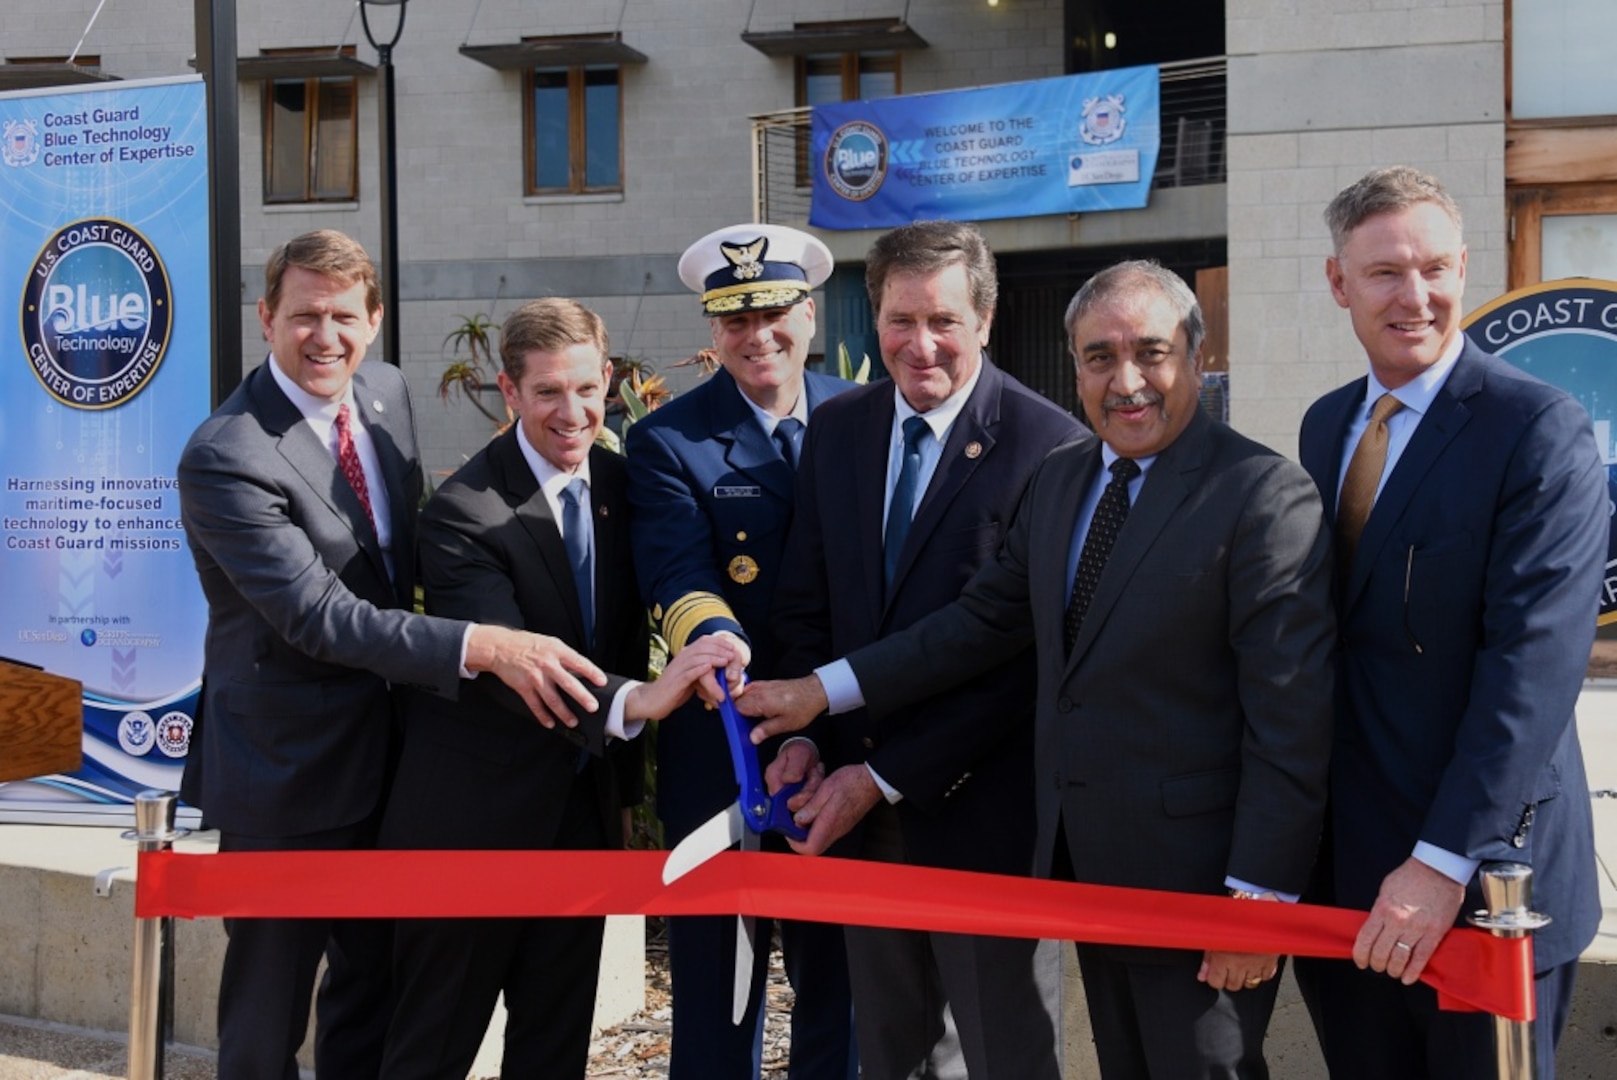 Port of San Diego Commissioner Marshall Merrifield, Rep. Mike Levin, Coast Guard Deputy Commandant for Mission Support Vice Adm. Michael F. McAllister, Rep. John Garamendi, Chancellor of the University of California San Diego Pradeep Khosla, and Rep. Scott Peters take part in a ribbon-cutting ceremony at Scripps Institution of Oceanography at the University of California San Diego Jan. 24, 2020. The Coast Guard entered into an agreement with Scripps Institution of Oceanography to establish the Blue Technology Center of Expertise, which will provide opportunities for rapid identification and integration of new blue technologies into current Coast Guard capabilities. (Coast Guard photo by Petty Officer 1st Class Patrick Kelley.)